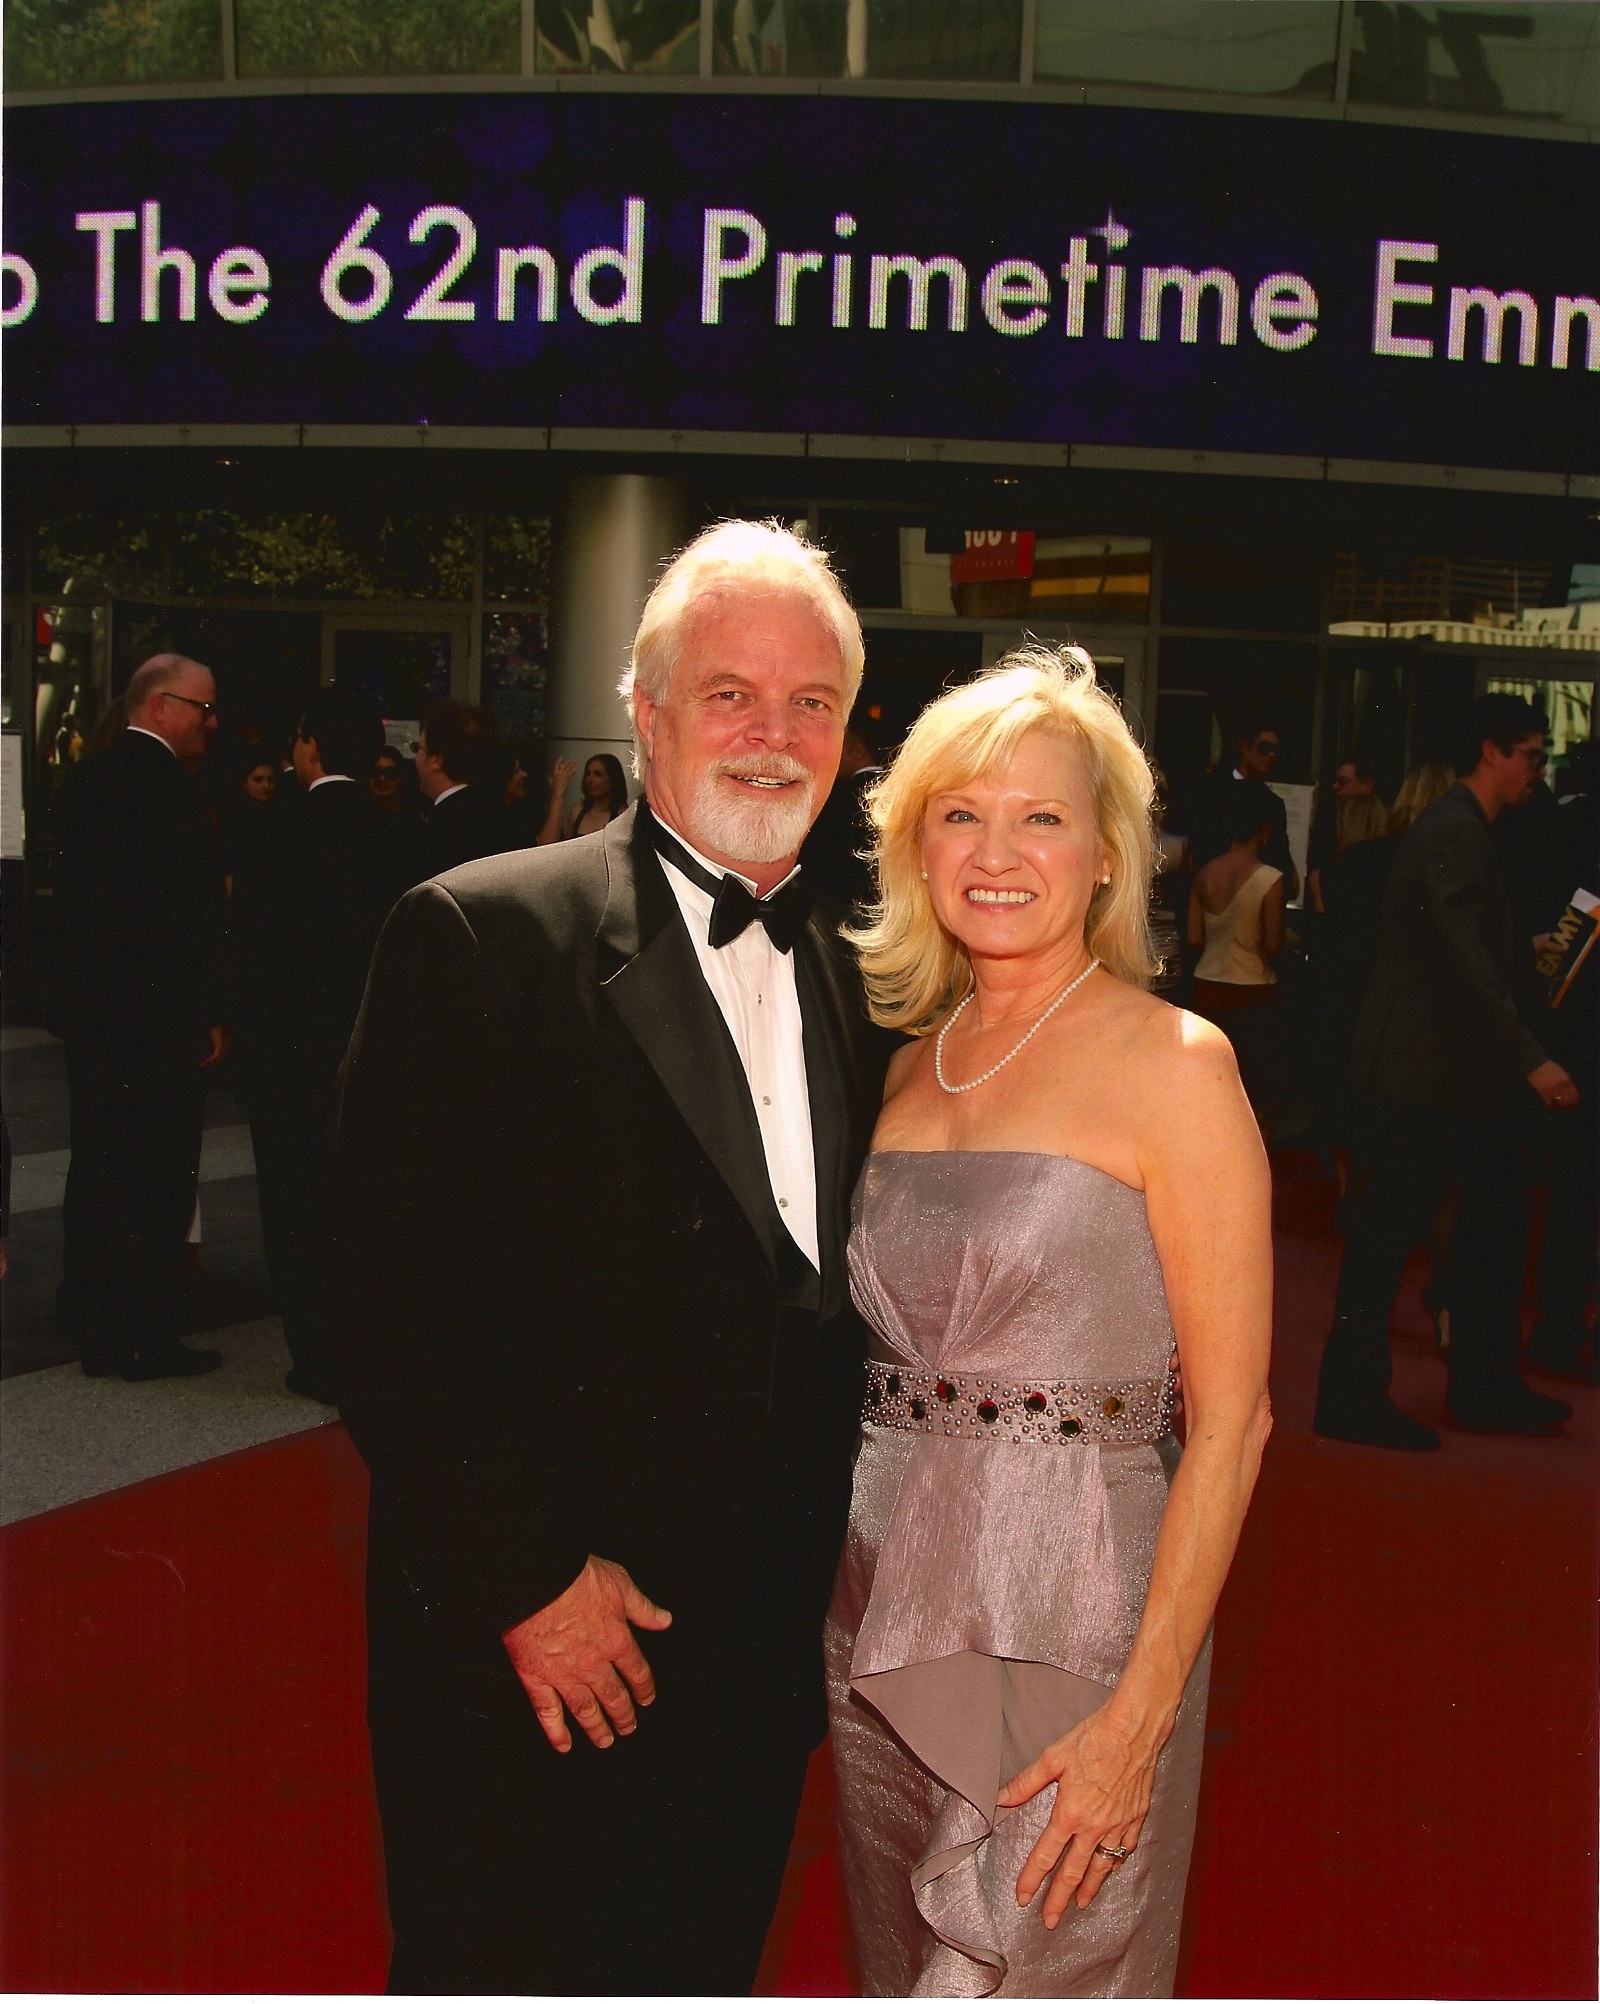 2010 Emmys Red Carpet, Kathy and Rick (Nominated for 